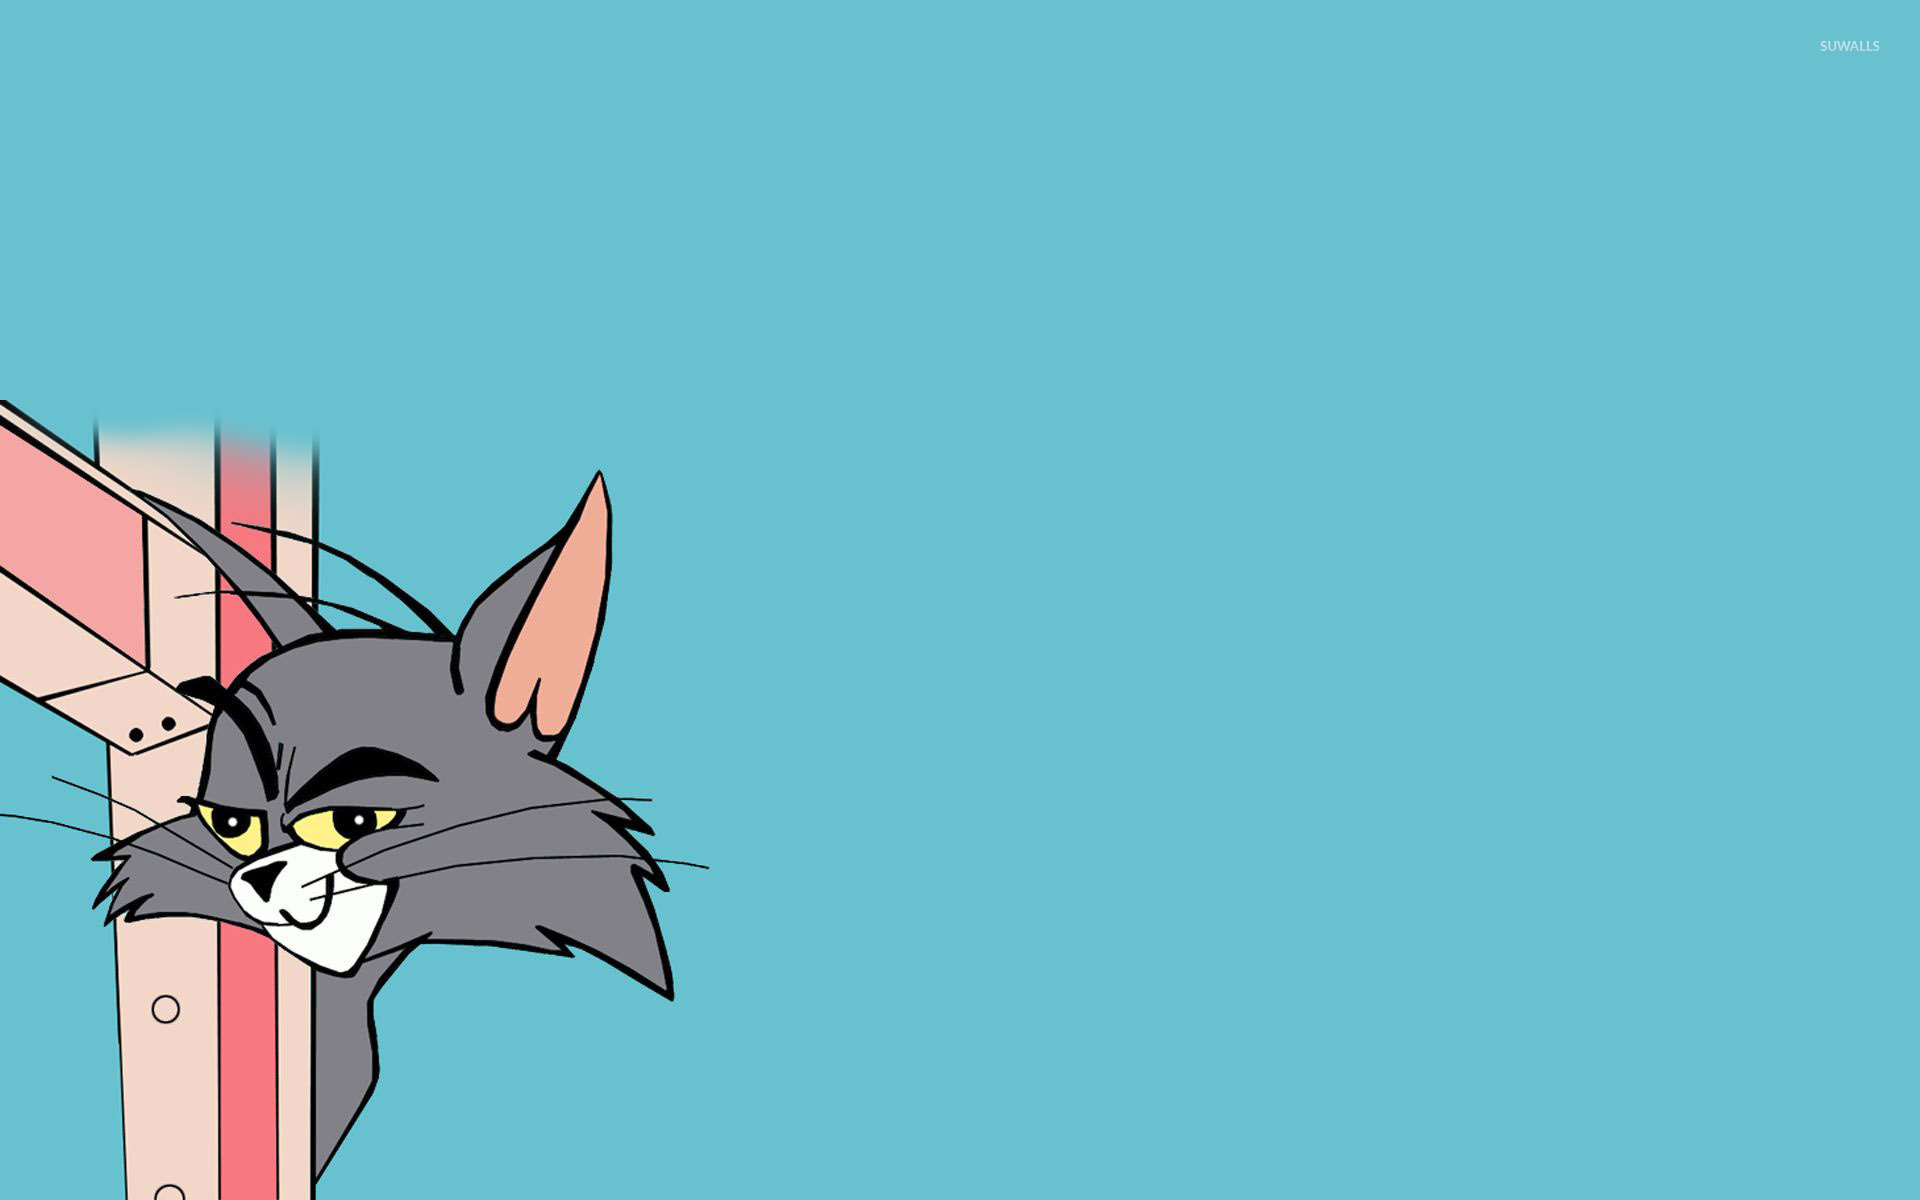 Tom And Jerry Wallpaper